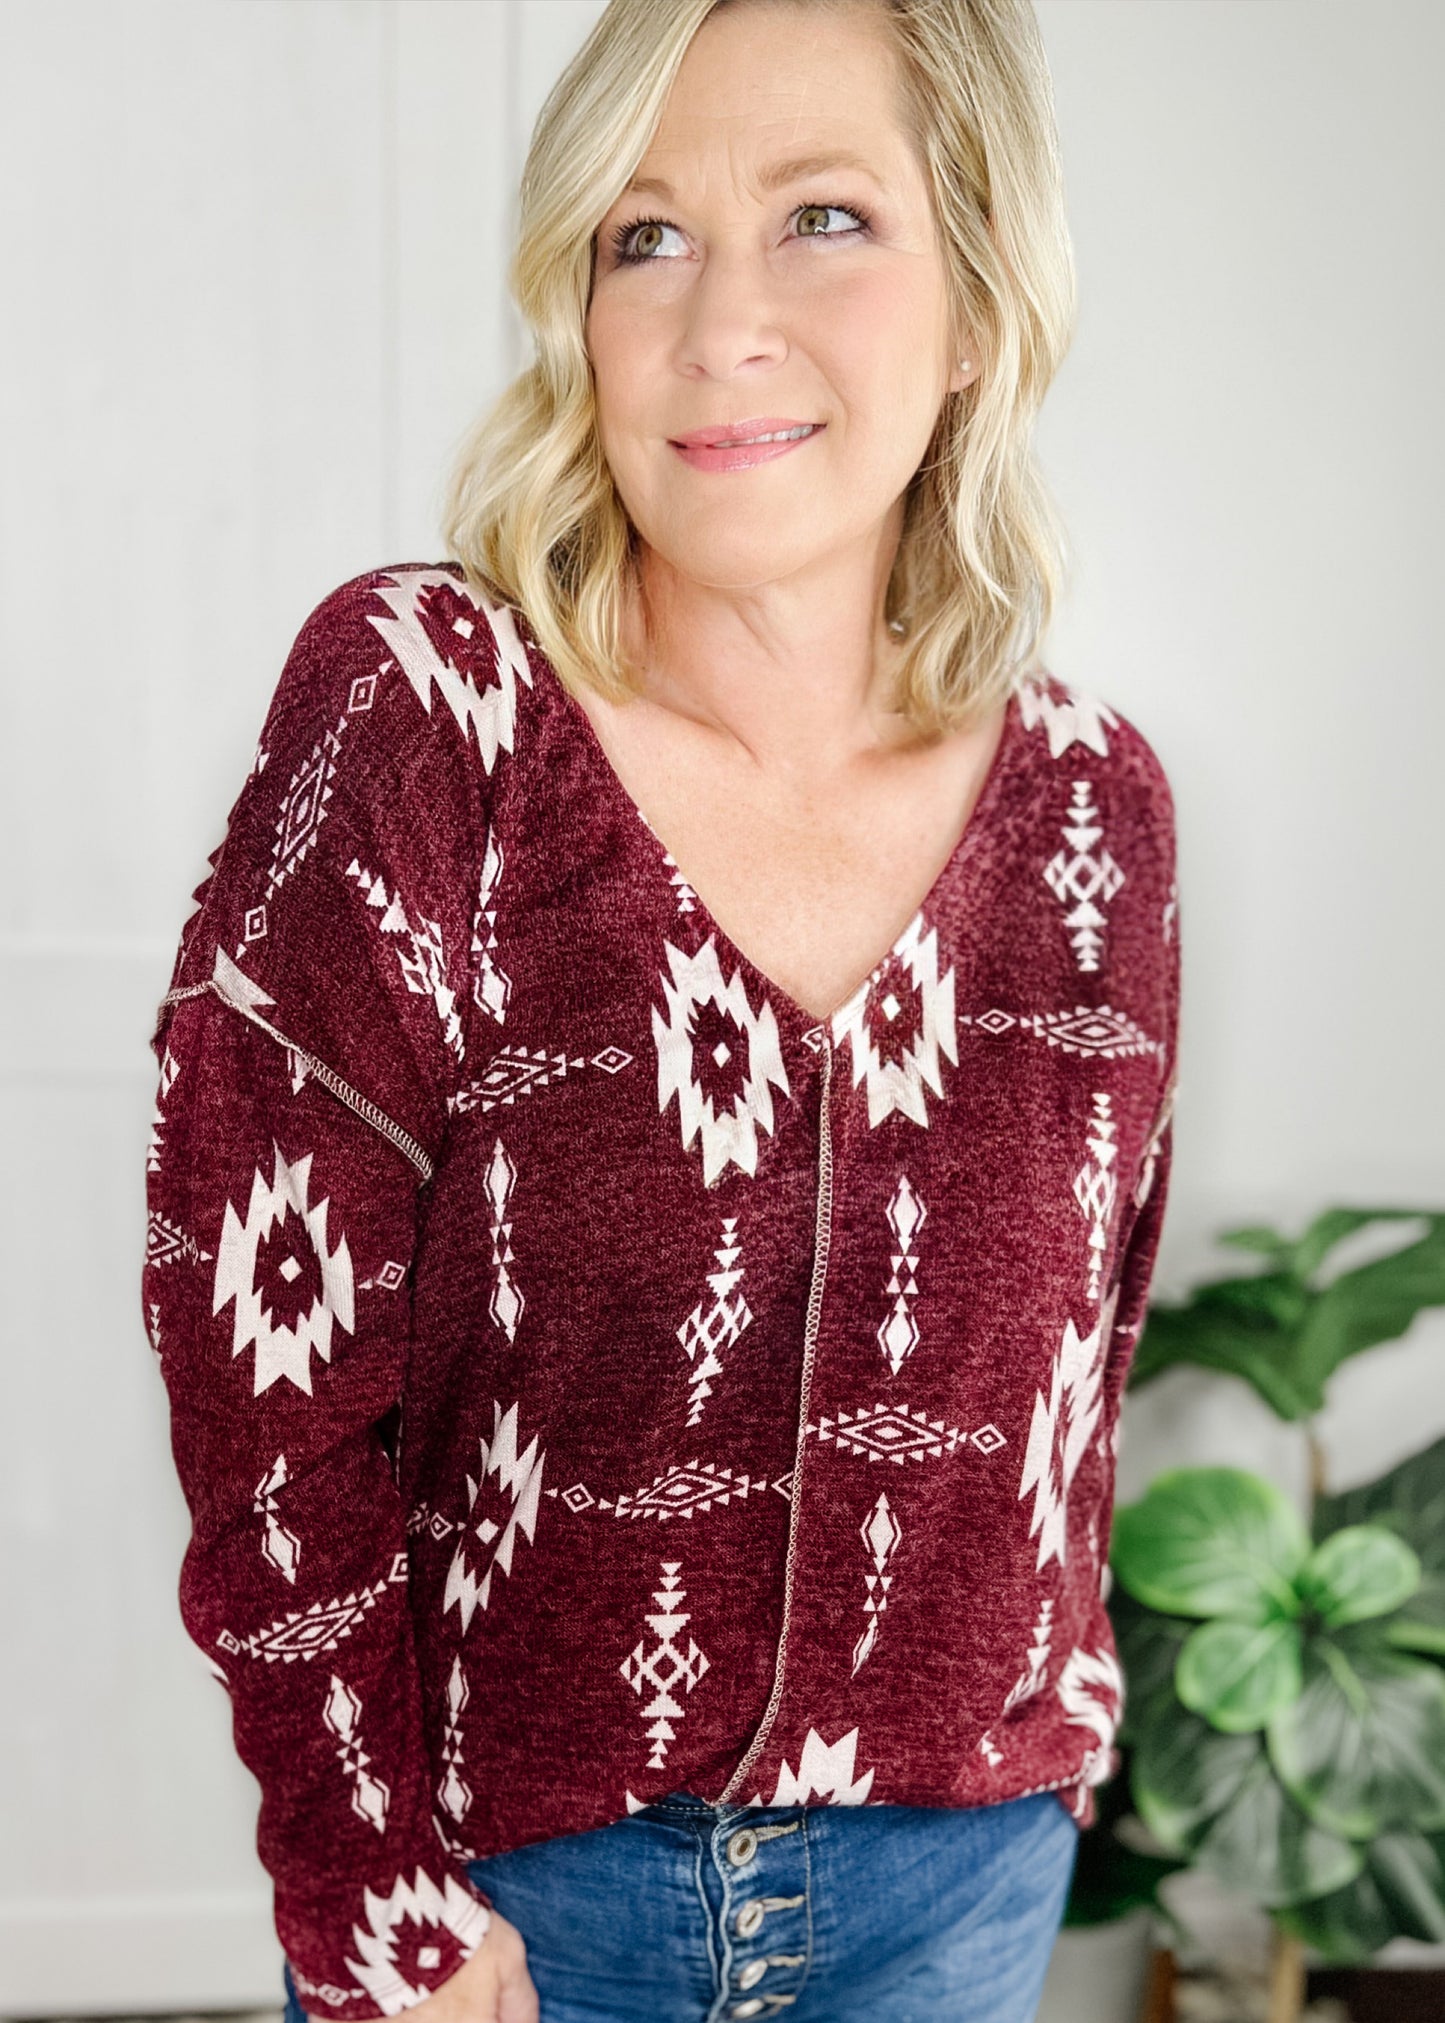 Aztec print top in Burgundy. Top features, deep v neckline, long sleeves, straight hemline, stitch detail going down front and at shoulder.  Shown with out high rise skinny jeans. 